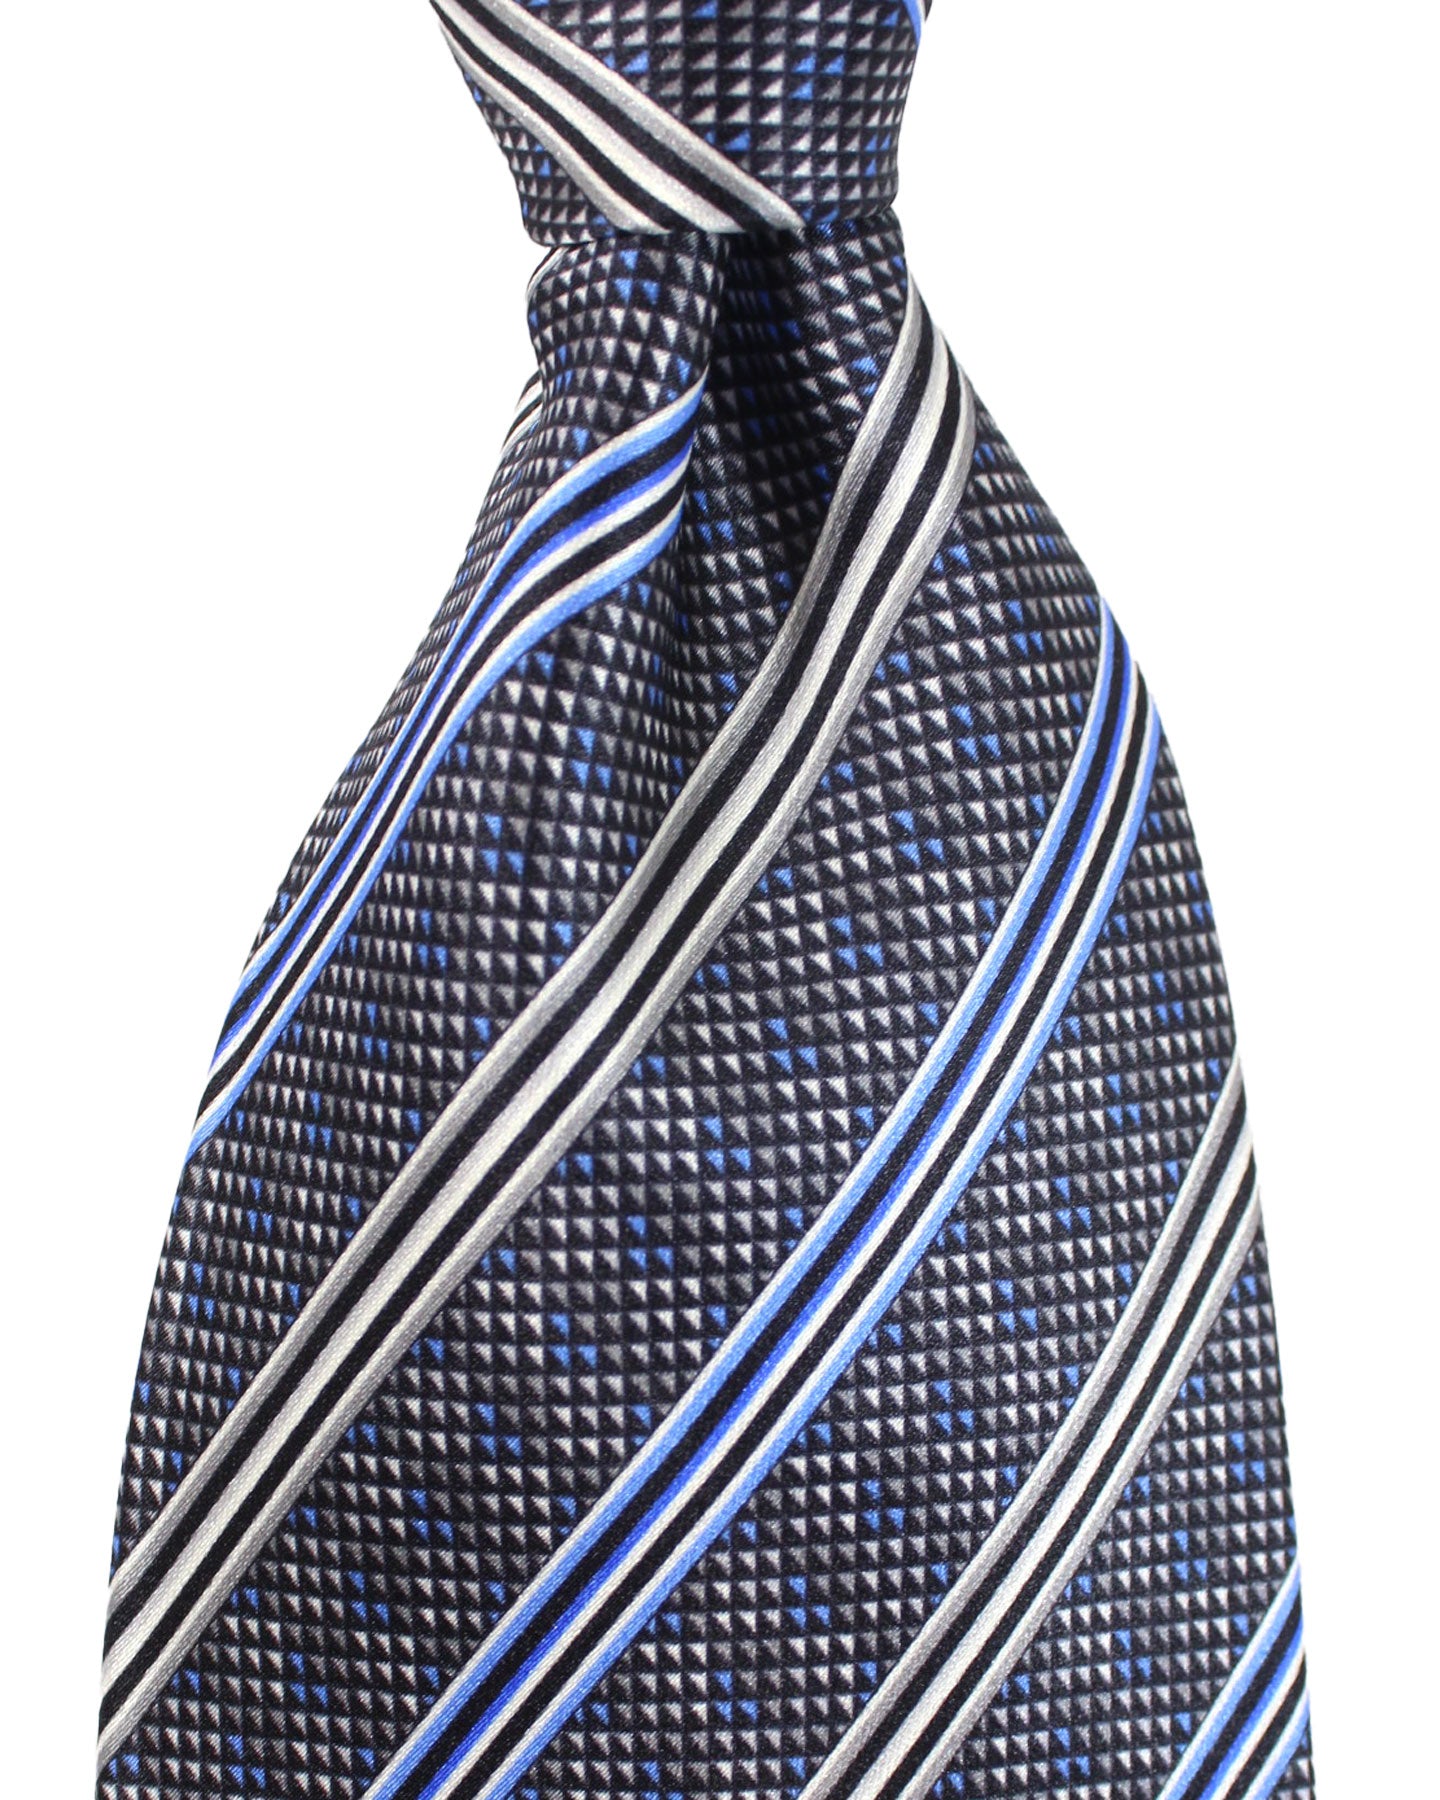 Zilli Extra Long Necktie Gray Royal Blue Stripes - Hand Made In Italy